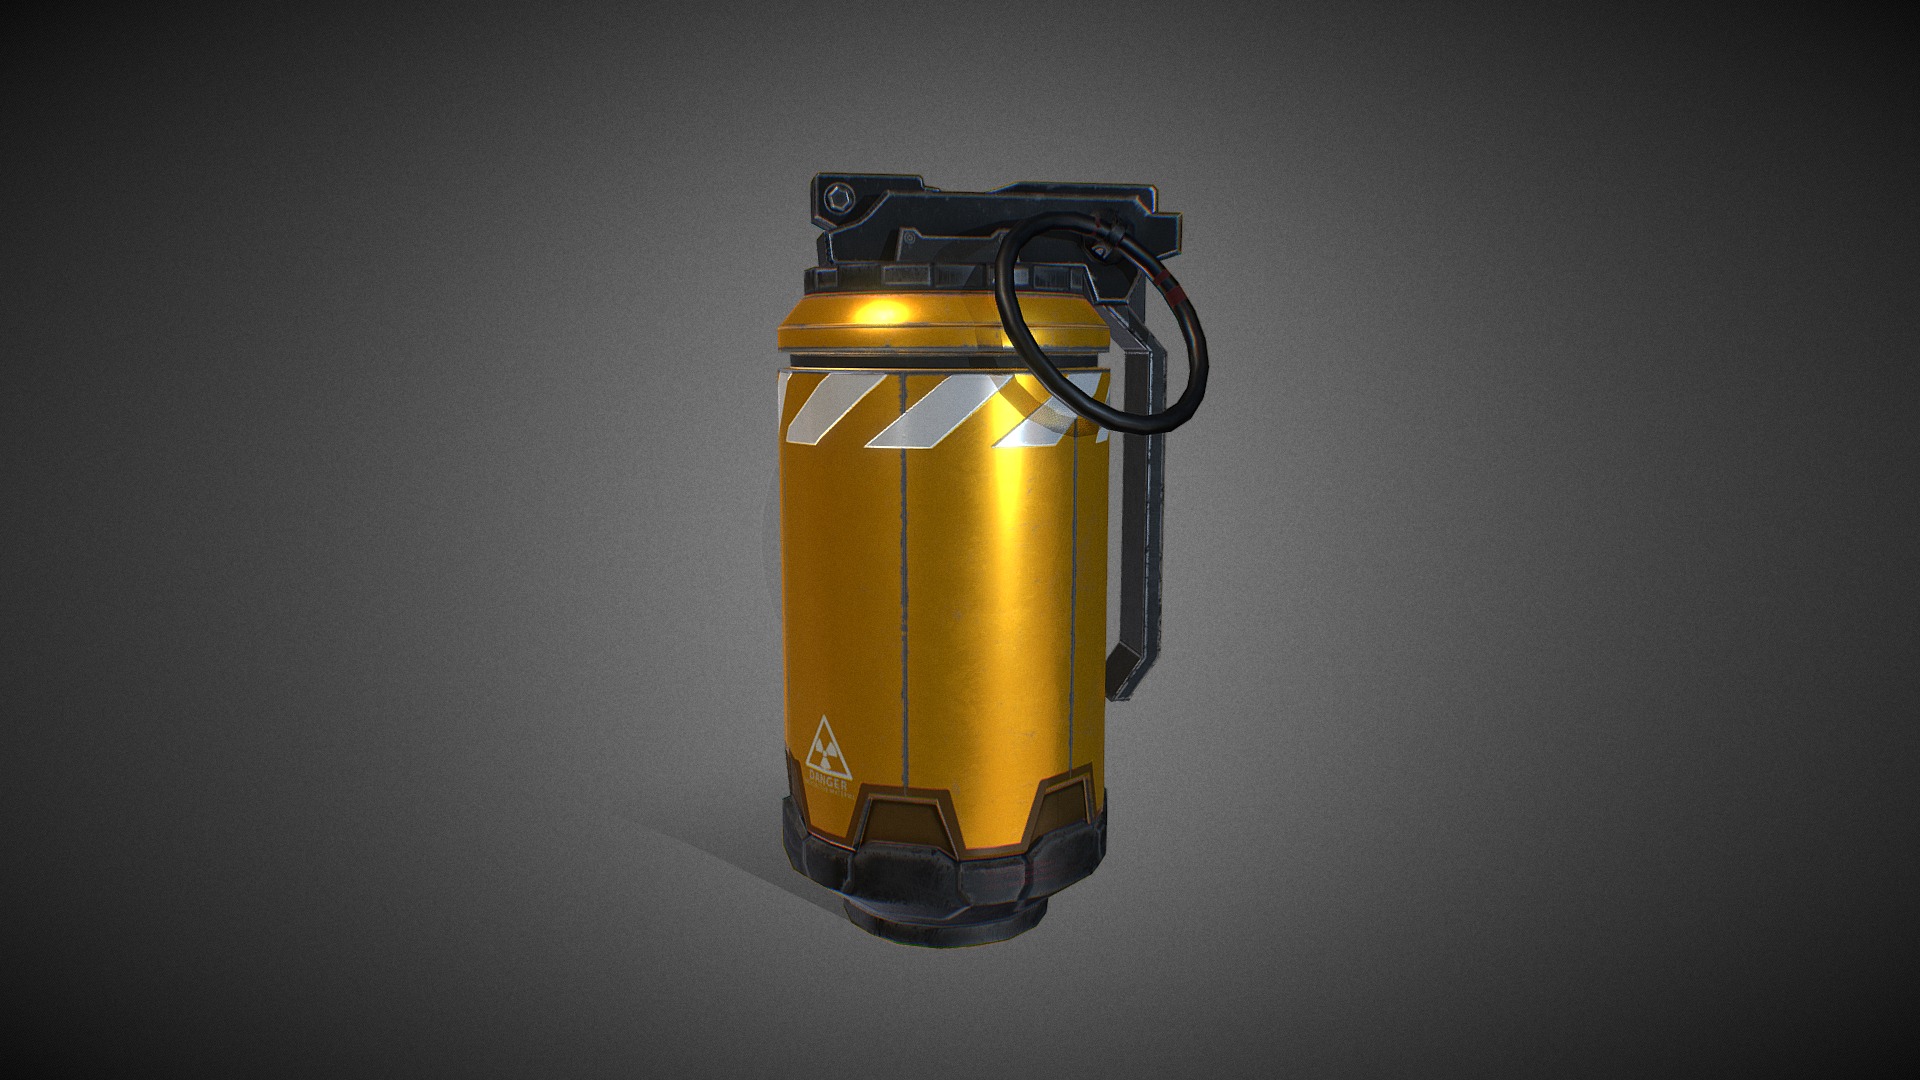 3D model Grenade - This is a 3D model of the Grenade. The 3D model is about a yellow and black robot.